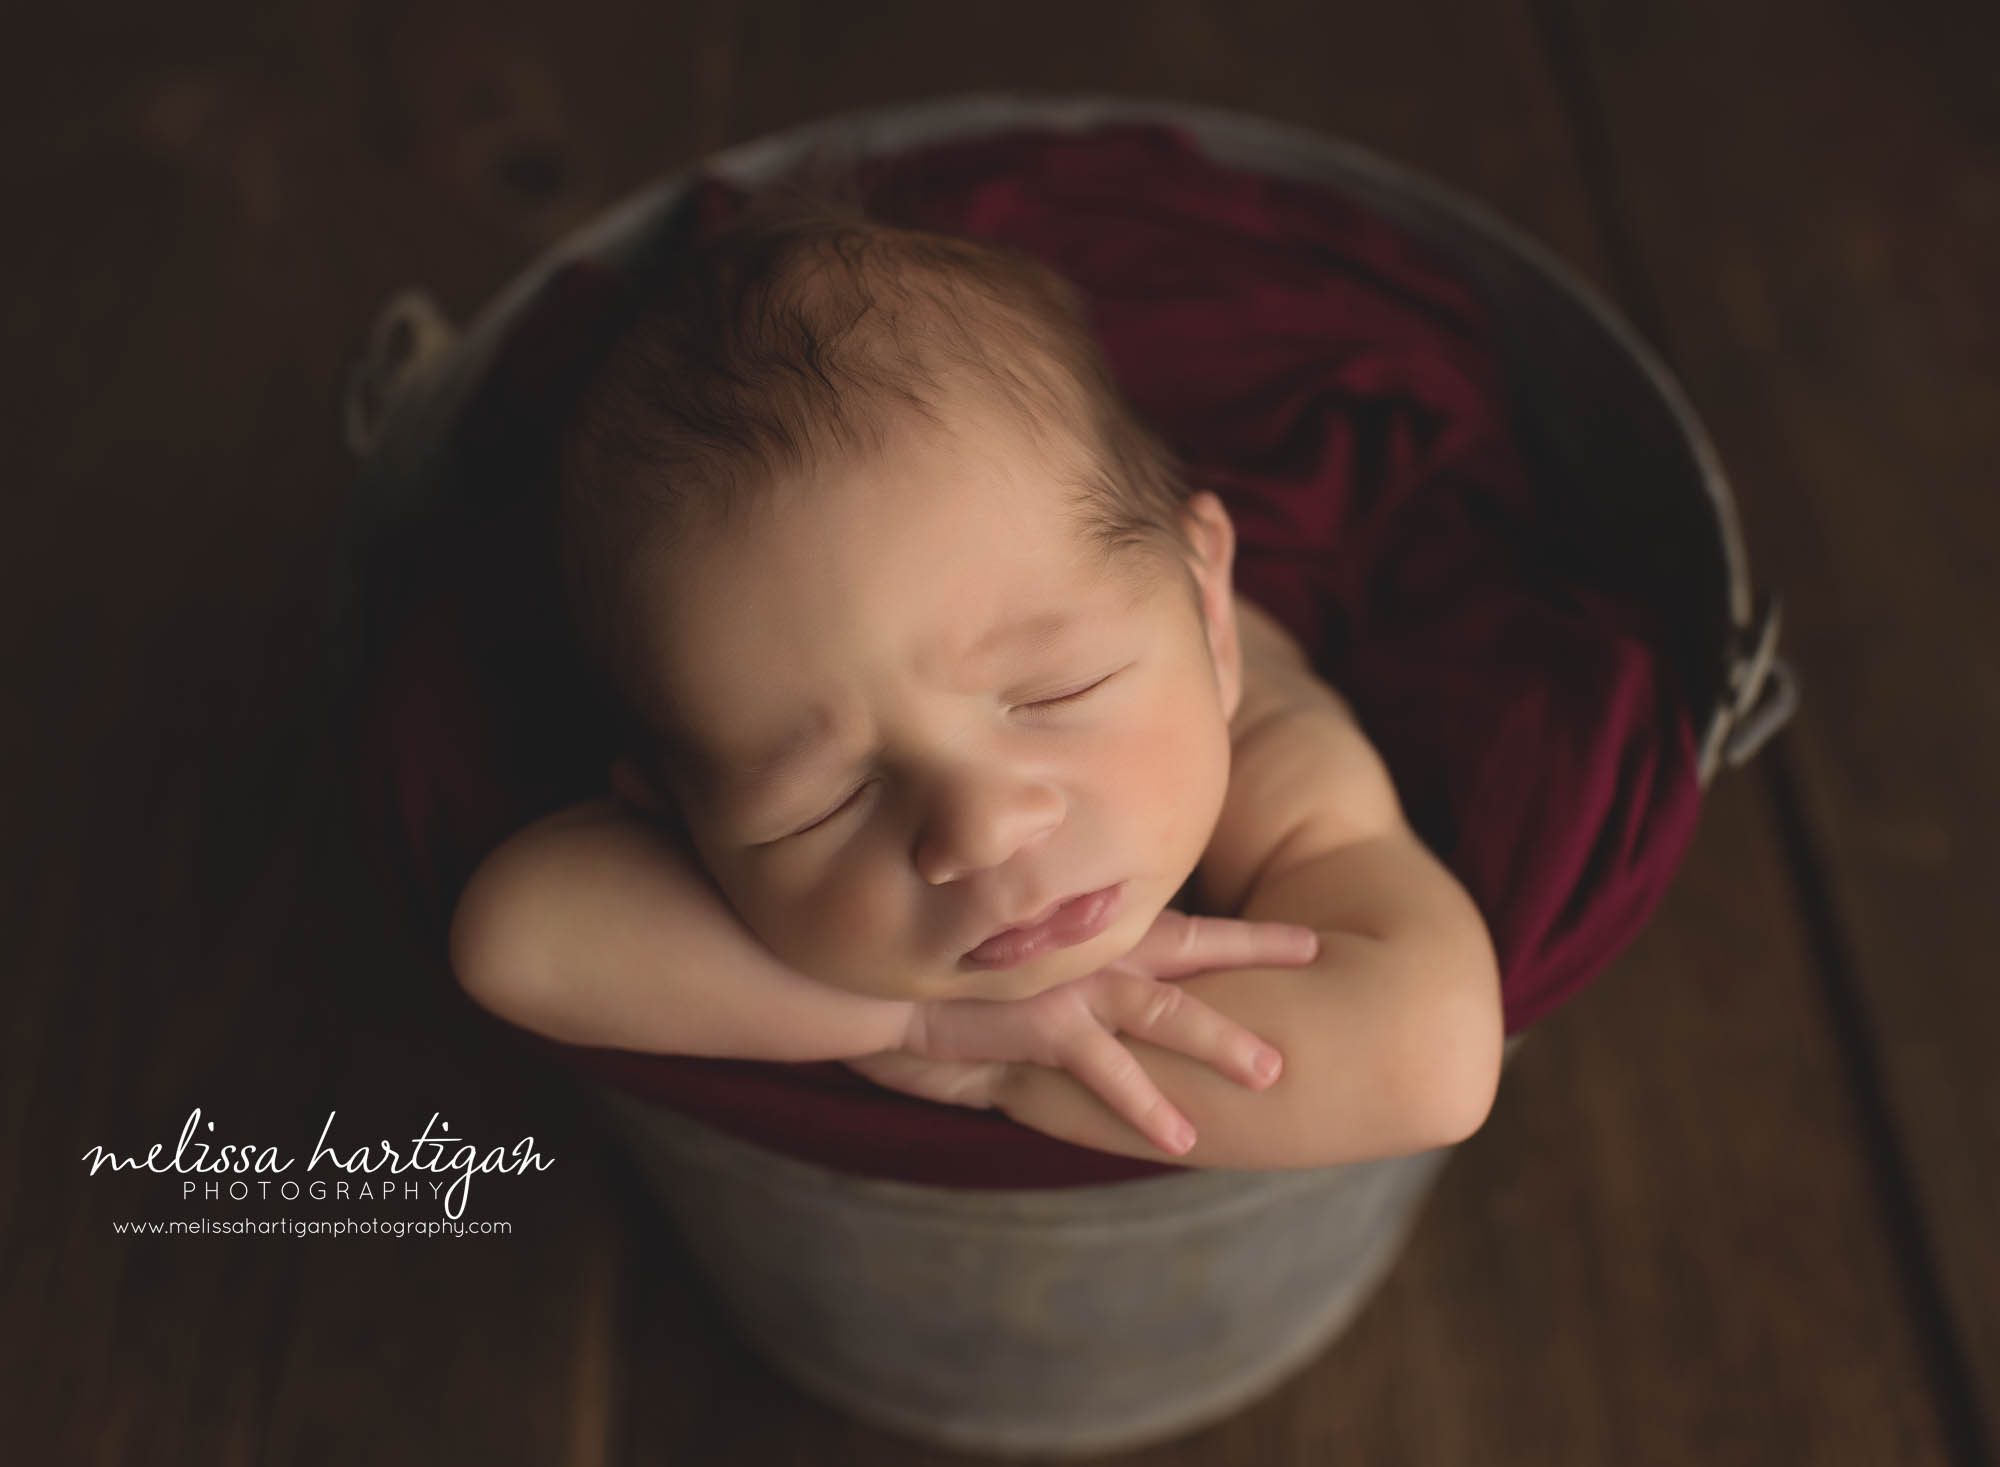 newborn posed with chin on hands in metal bucket with burgundy color wrap